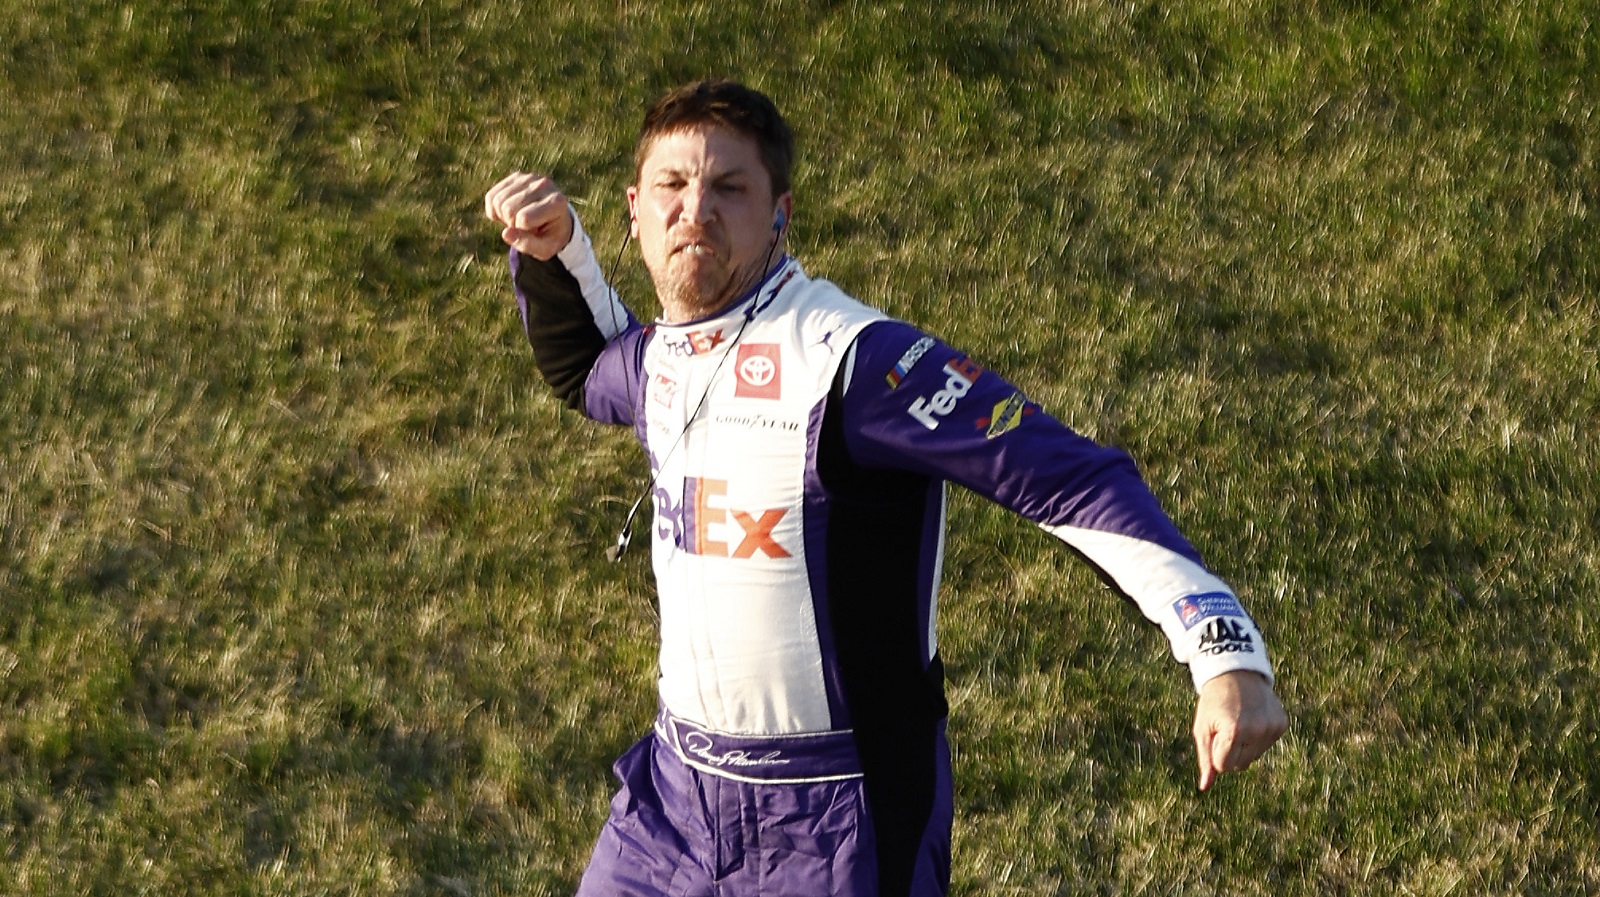 Denny Hamlin, driver of the No. 11 Toyota, celebrates after winning the NASCAR Cup Series Toyota Owners 400 at Richmond Raceway on April 3, 2022.